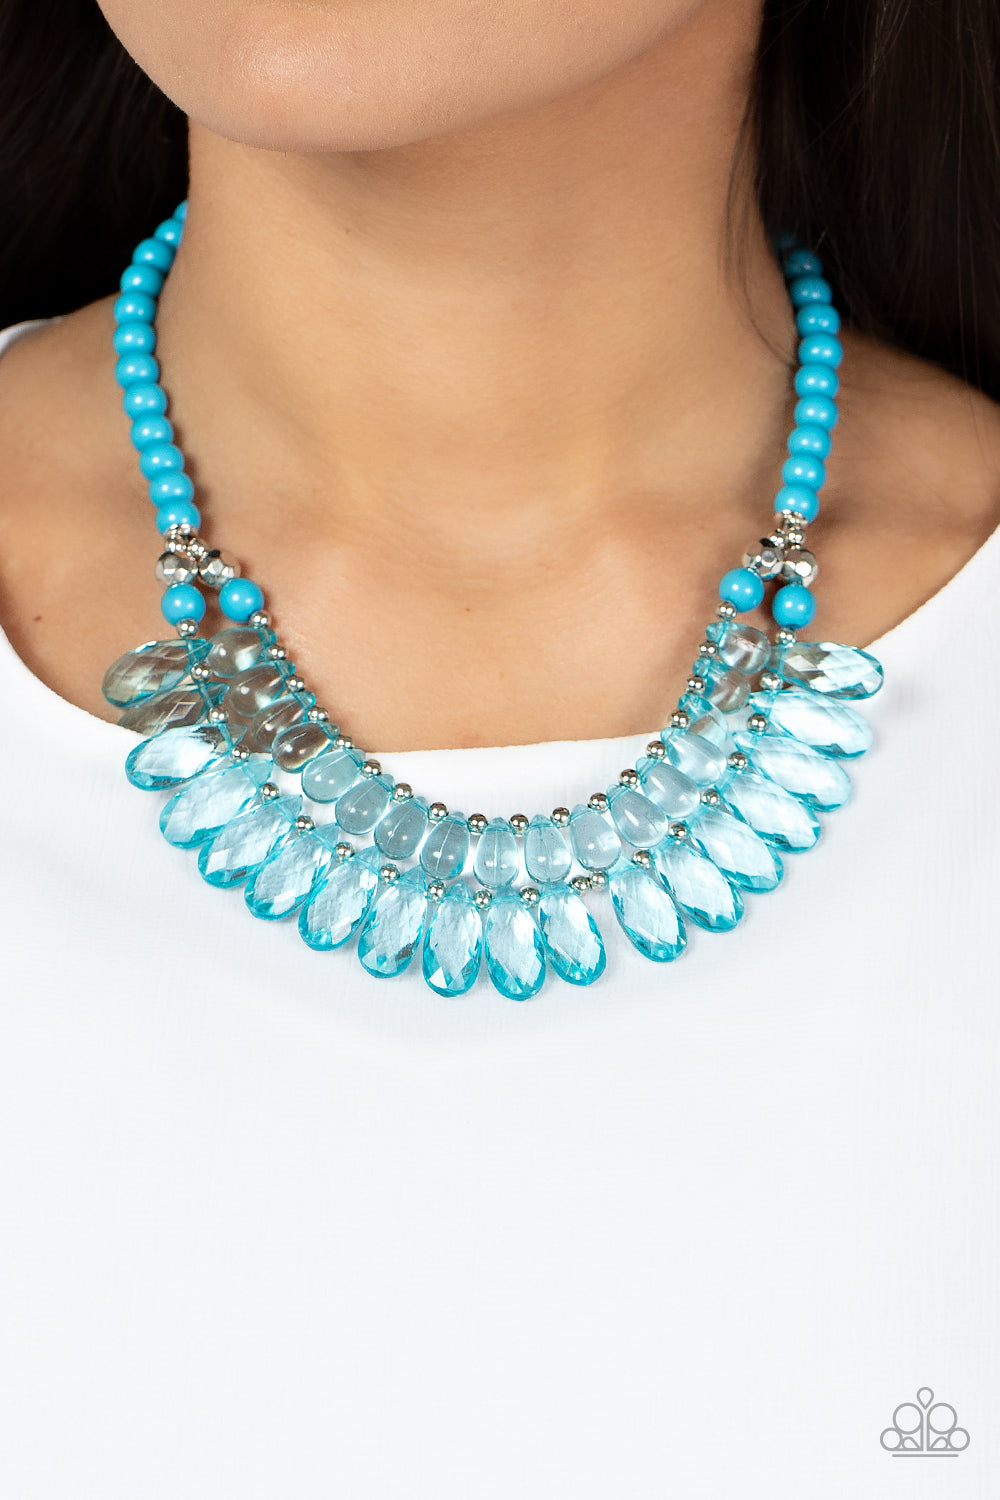 Paparazzi All Across the GLOBETROTTER - Blue Short Necklace. Free Shipping! #P2ST-BLXX-170XX